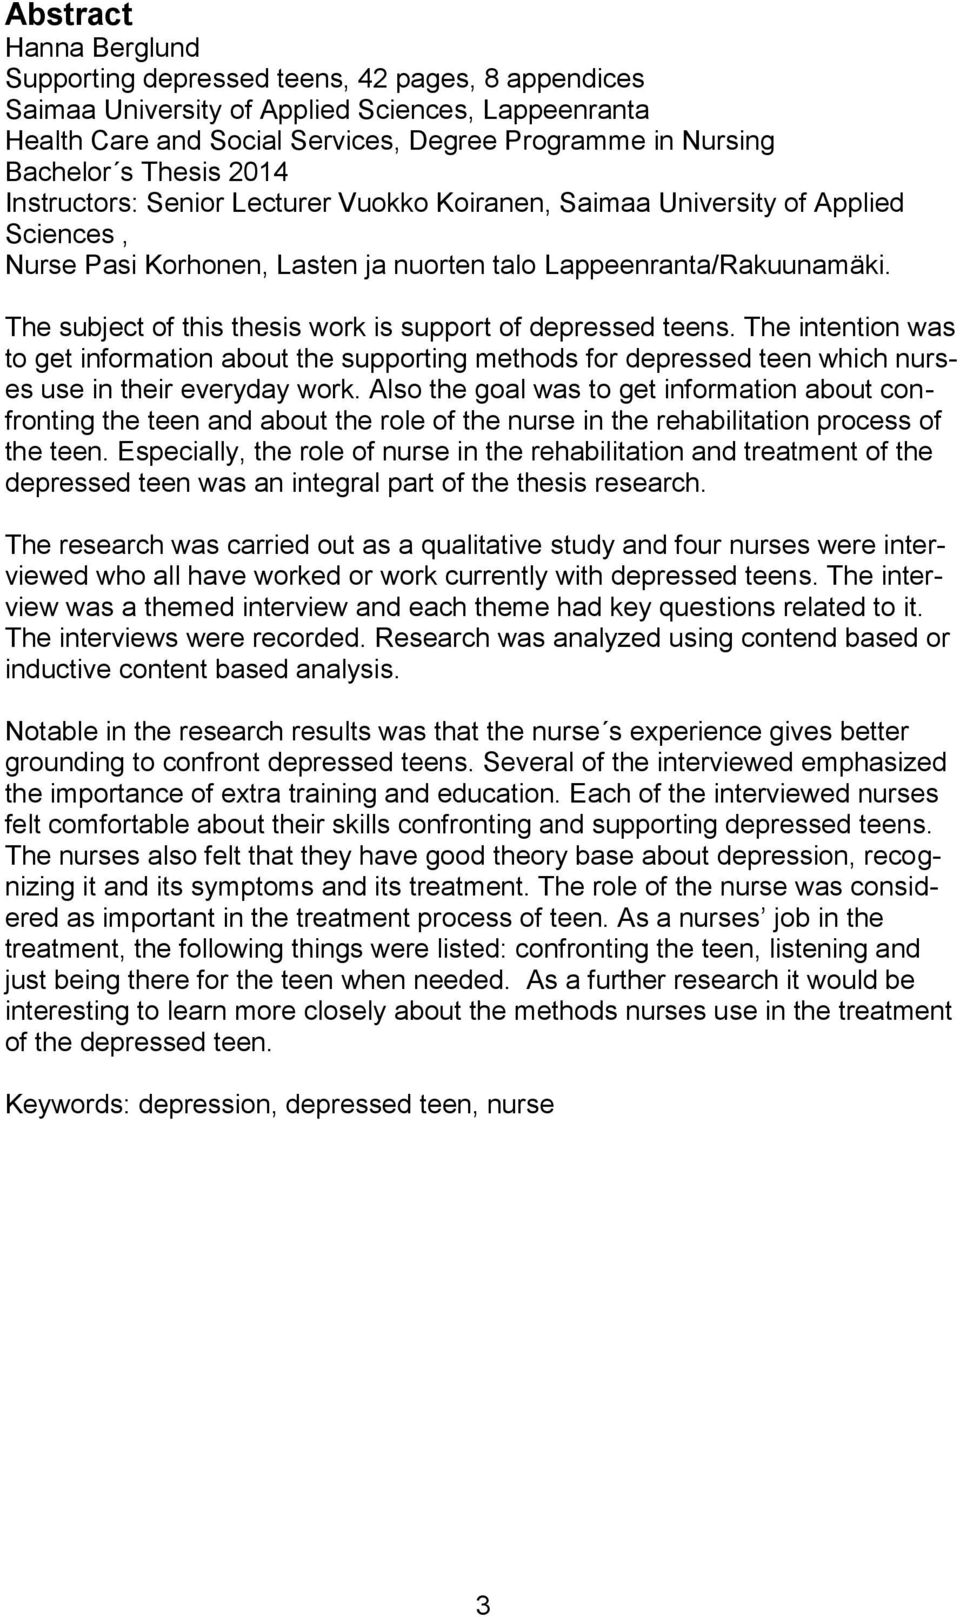 The subject of this thesis work is support of depressed teens. The intention was to get information about the supporting methods for depressed teen which nurses use in their everyday work.